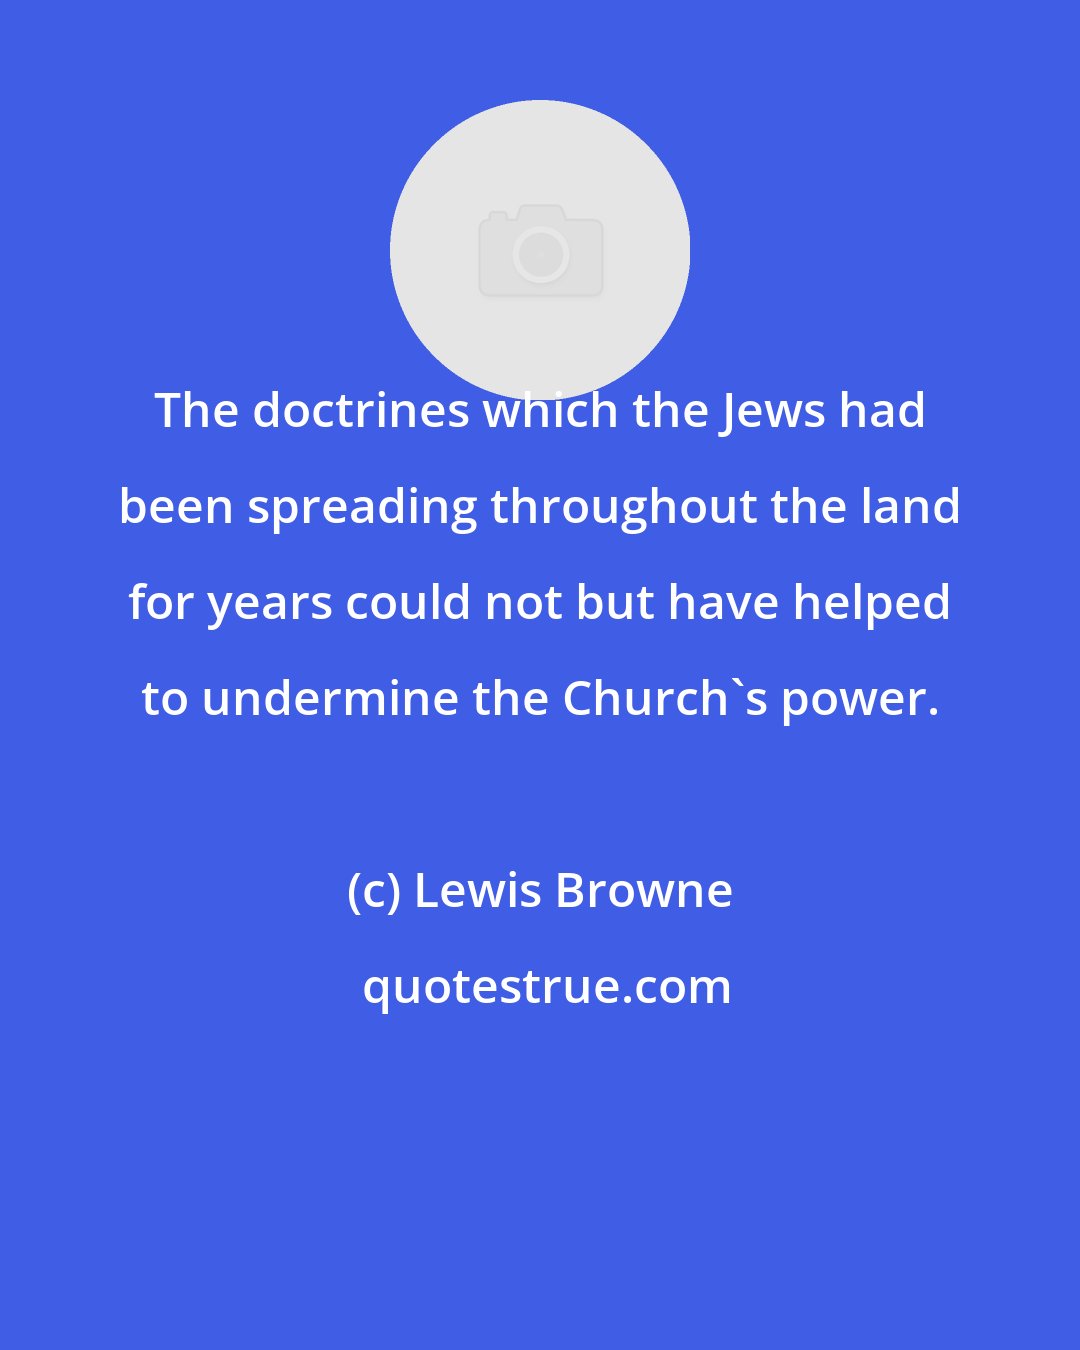 Lewis Browne: The doctrines which the Jews had been spreading throughout the land for years could not but have helped to undermine the Church's power.